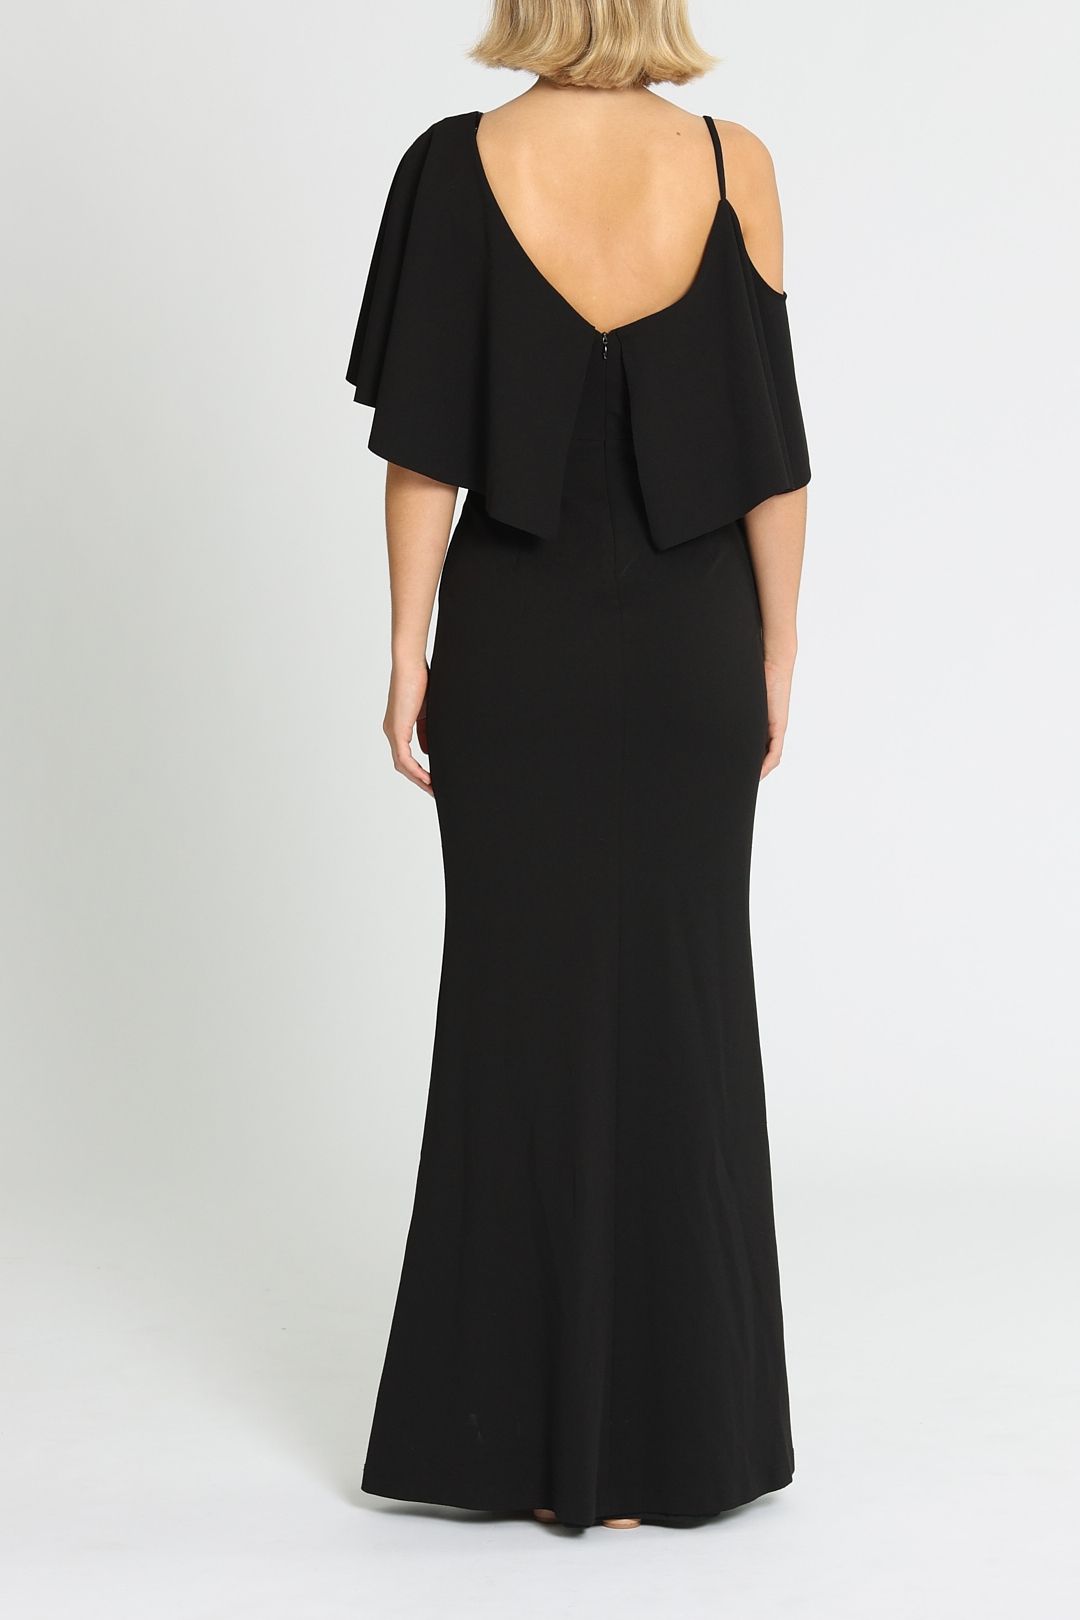 Pasduchas Irreplaceable Gown Black Frill Sleeves